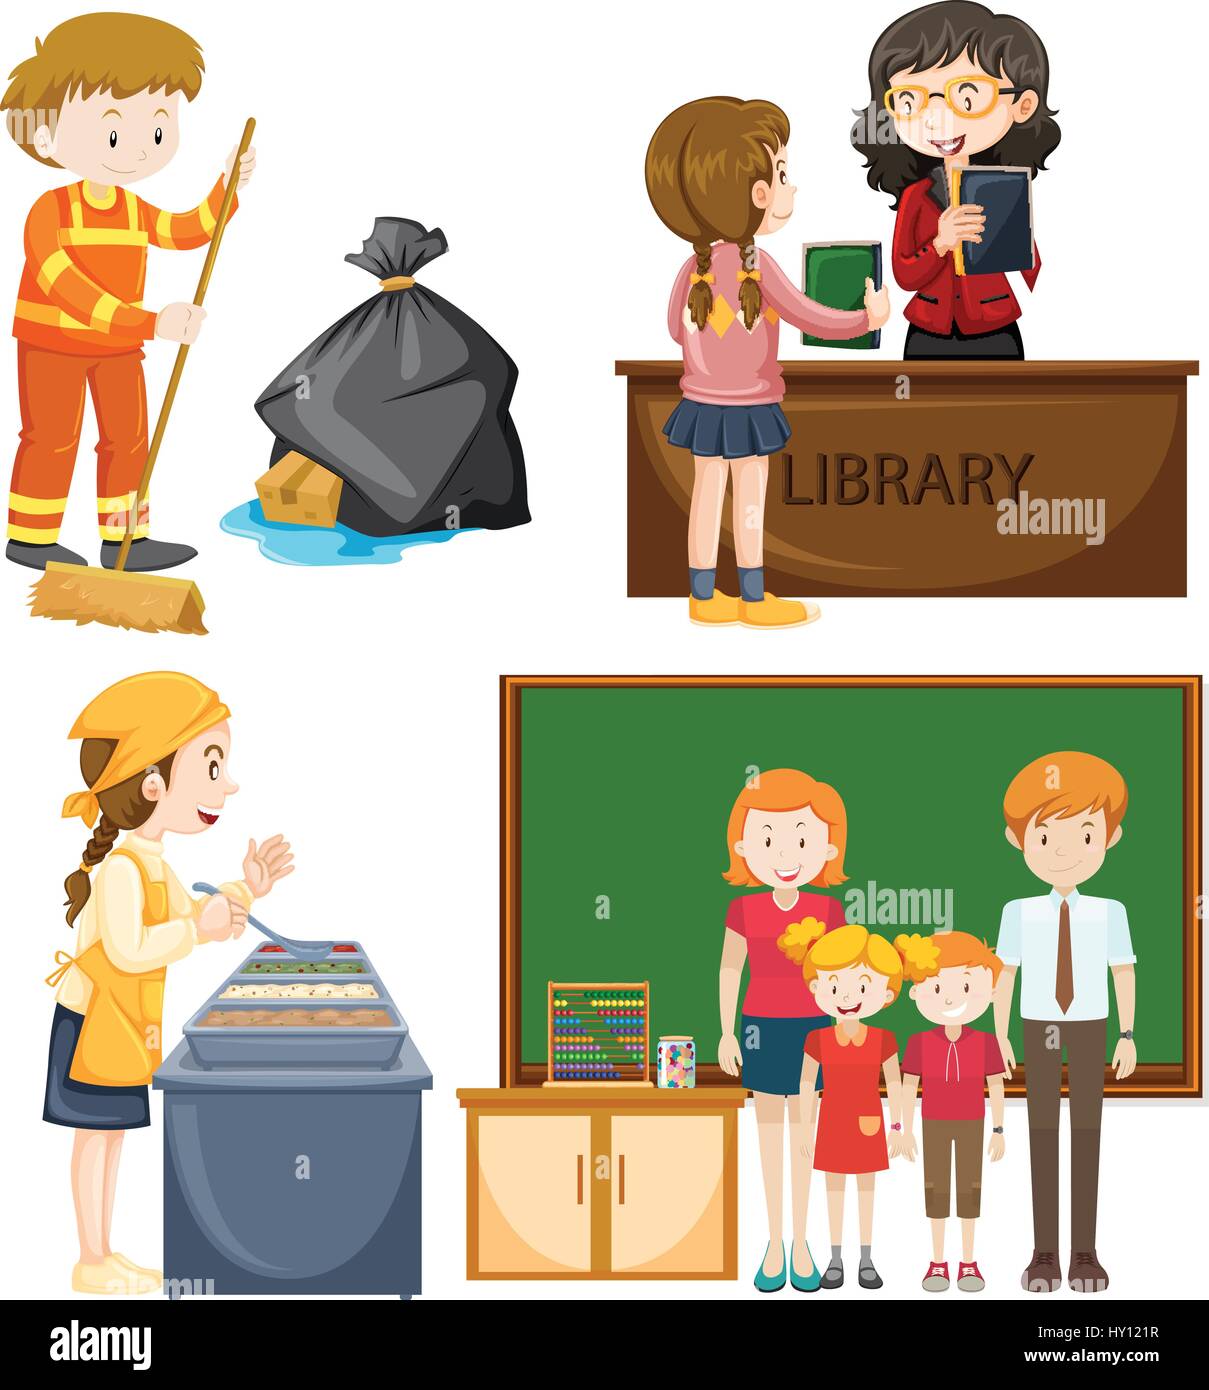 People doing different types of jobs illustration Stock Vector